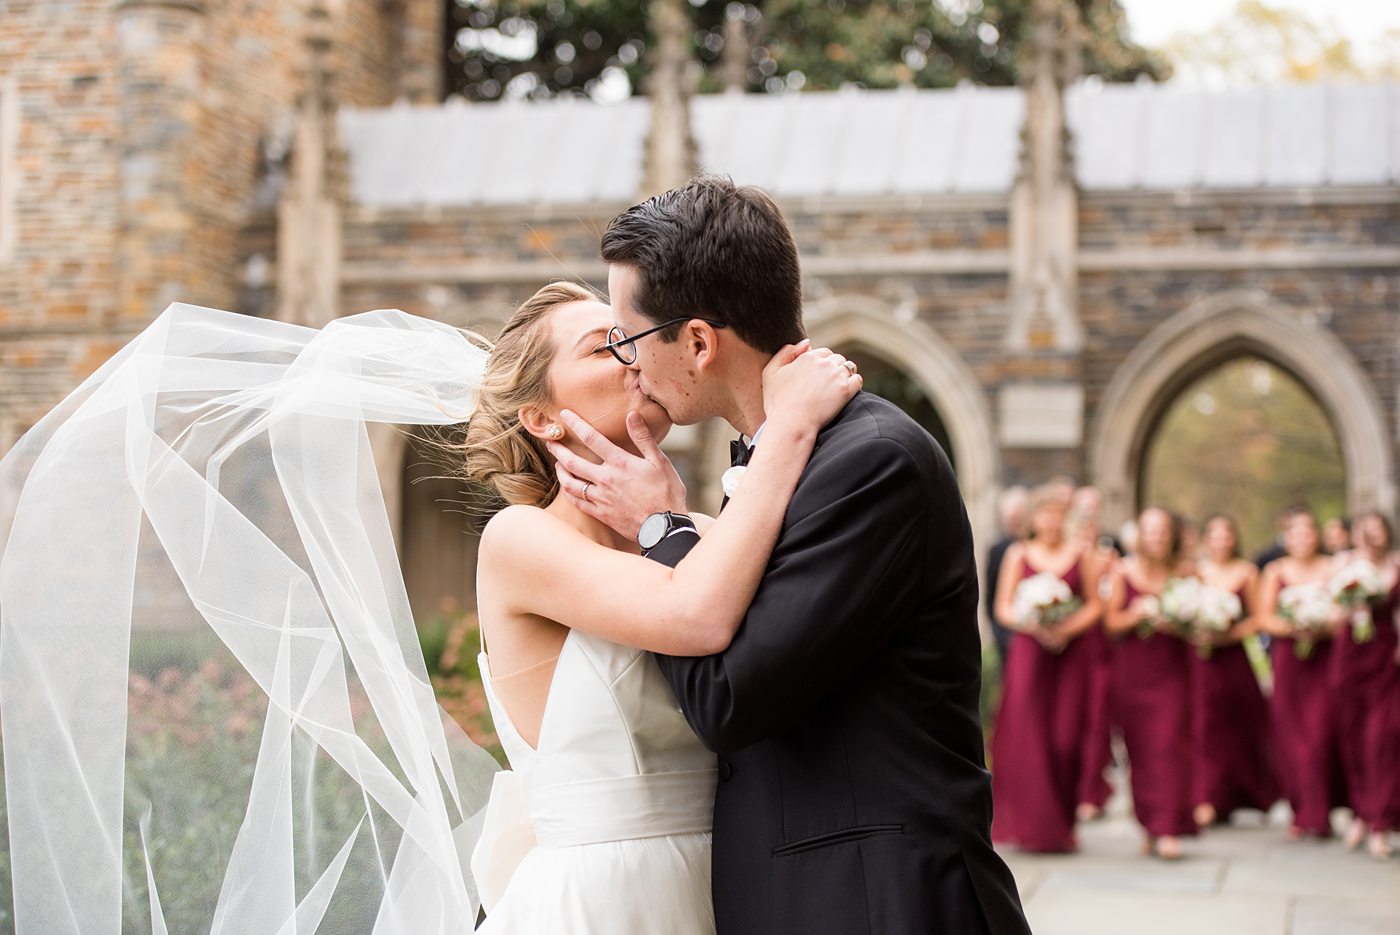 Wedding photographer Mikkel Paige Photography captures a ceremony at Duke Chapel and reception at The Rickhouse, a beautiful downtown venue in Durham, North Carolina. #DukeChapelWedding #DurhamWeddingNorthCarolina #DurhamWeddingPhotographer #MikkelPaige